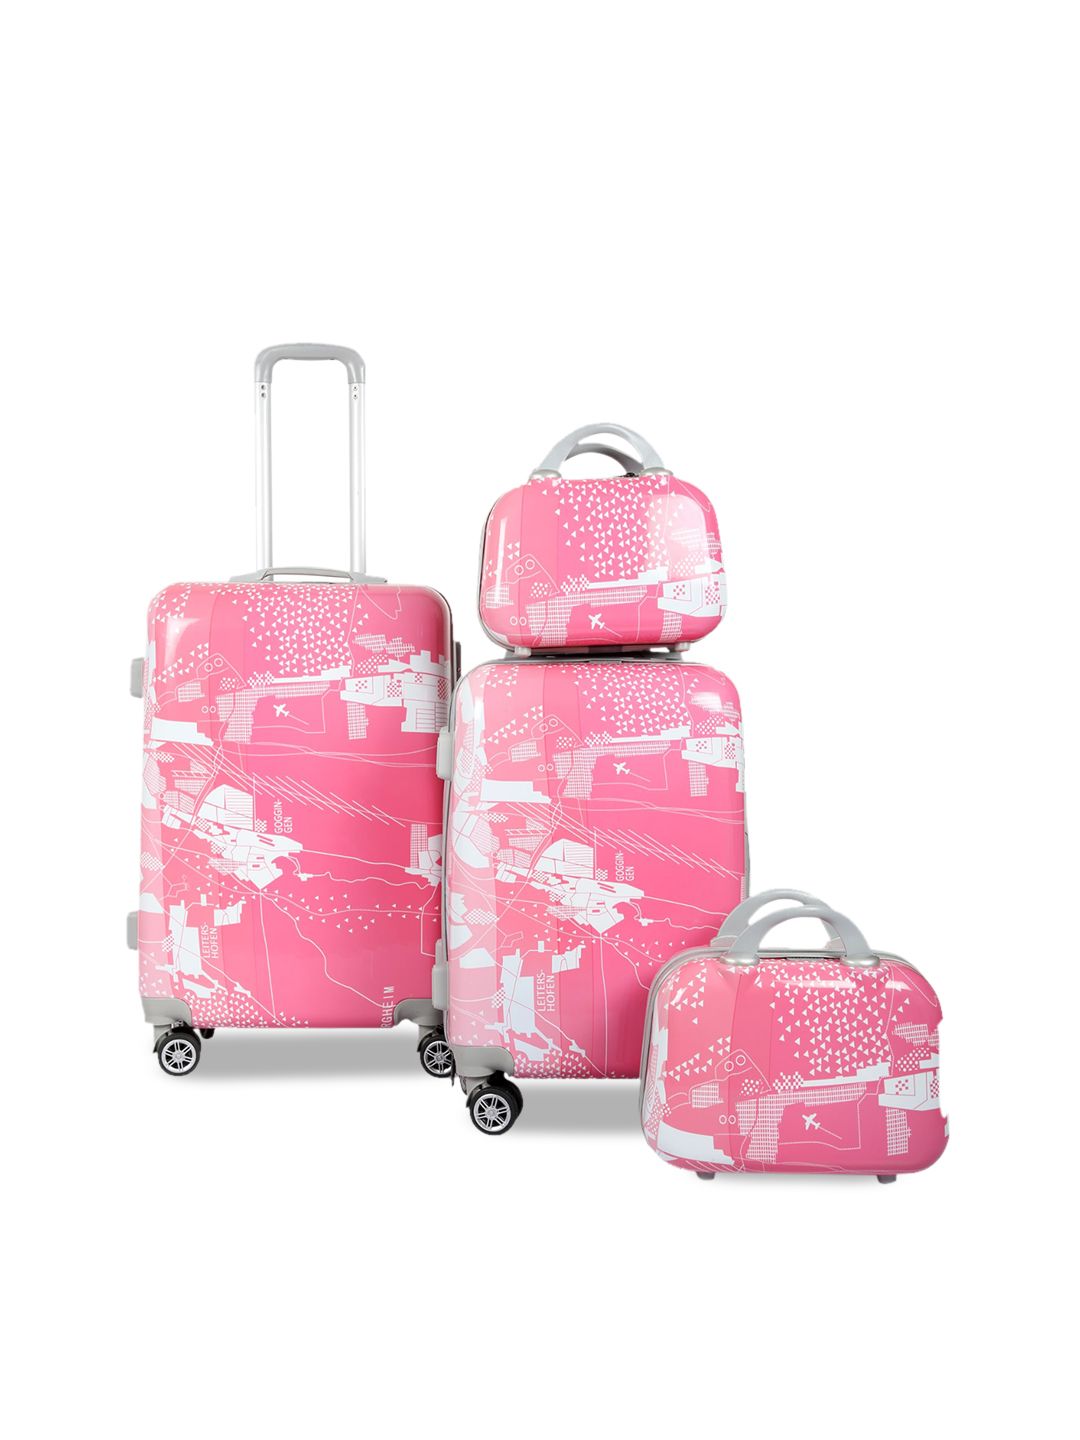 Polo Class Pink 2Pc Set Hard Luggage Trolley Bag (20/24 inch) with 2 pc Vanity Price in India